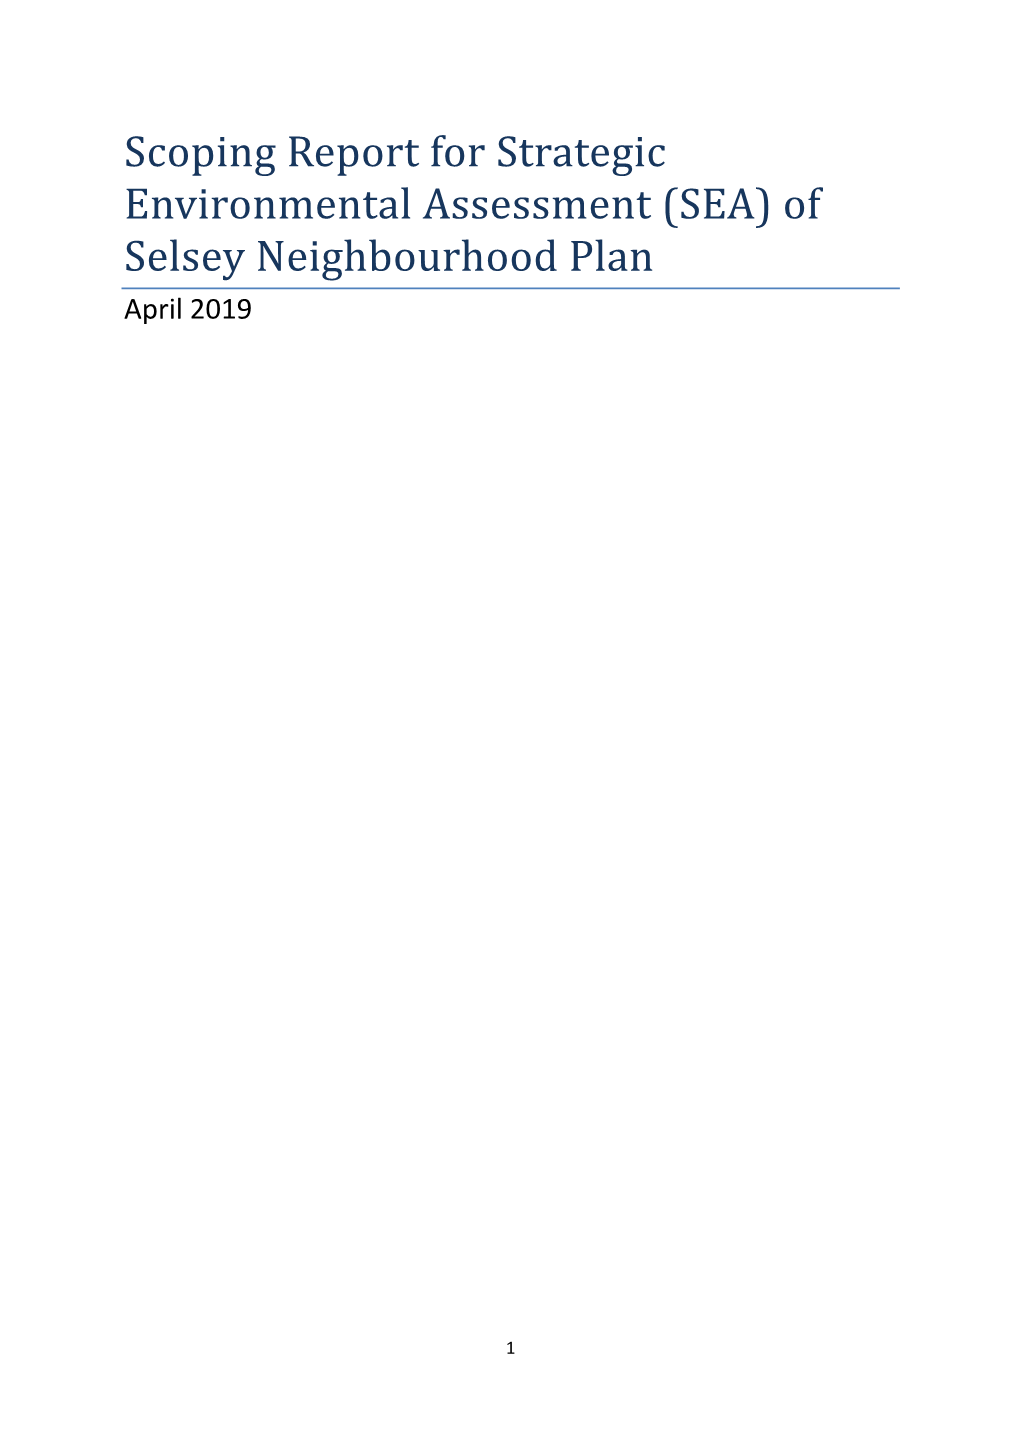 Scoping Report for Strategic Environmental Assessment (SEA) of Selsey Neighbourhood Plan April 2019